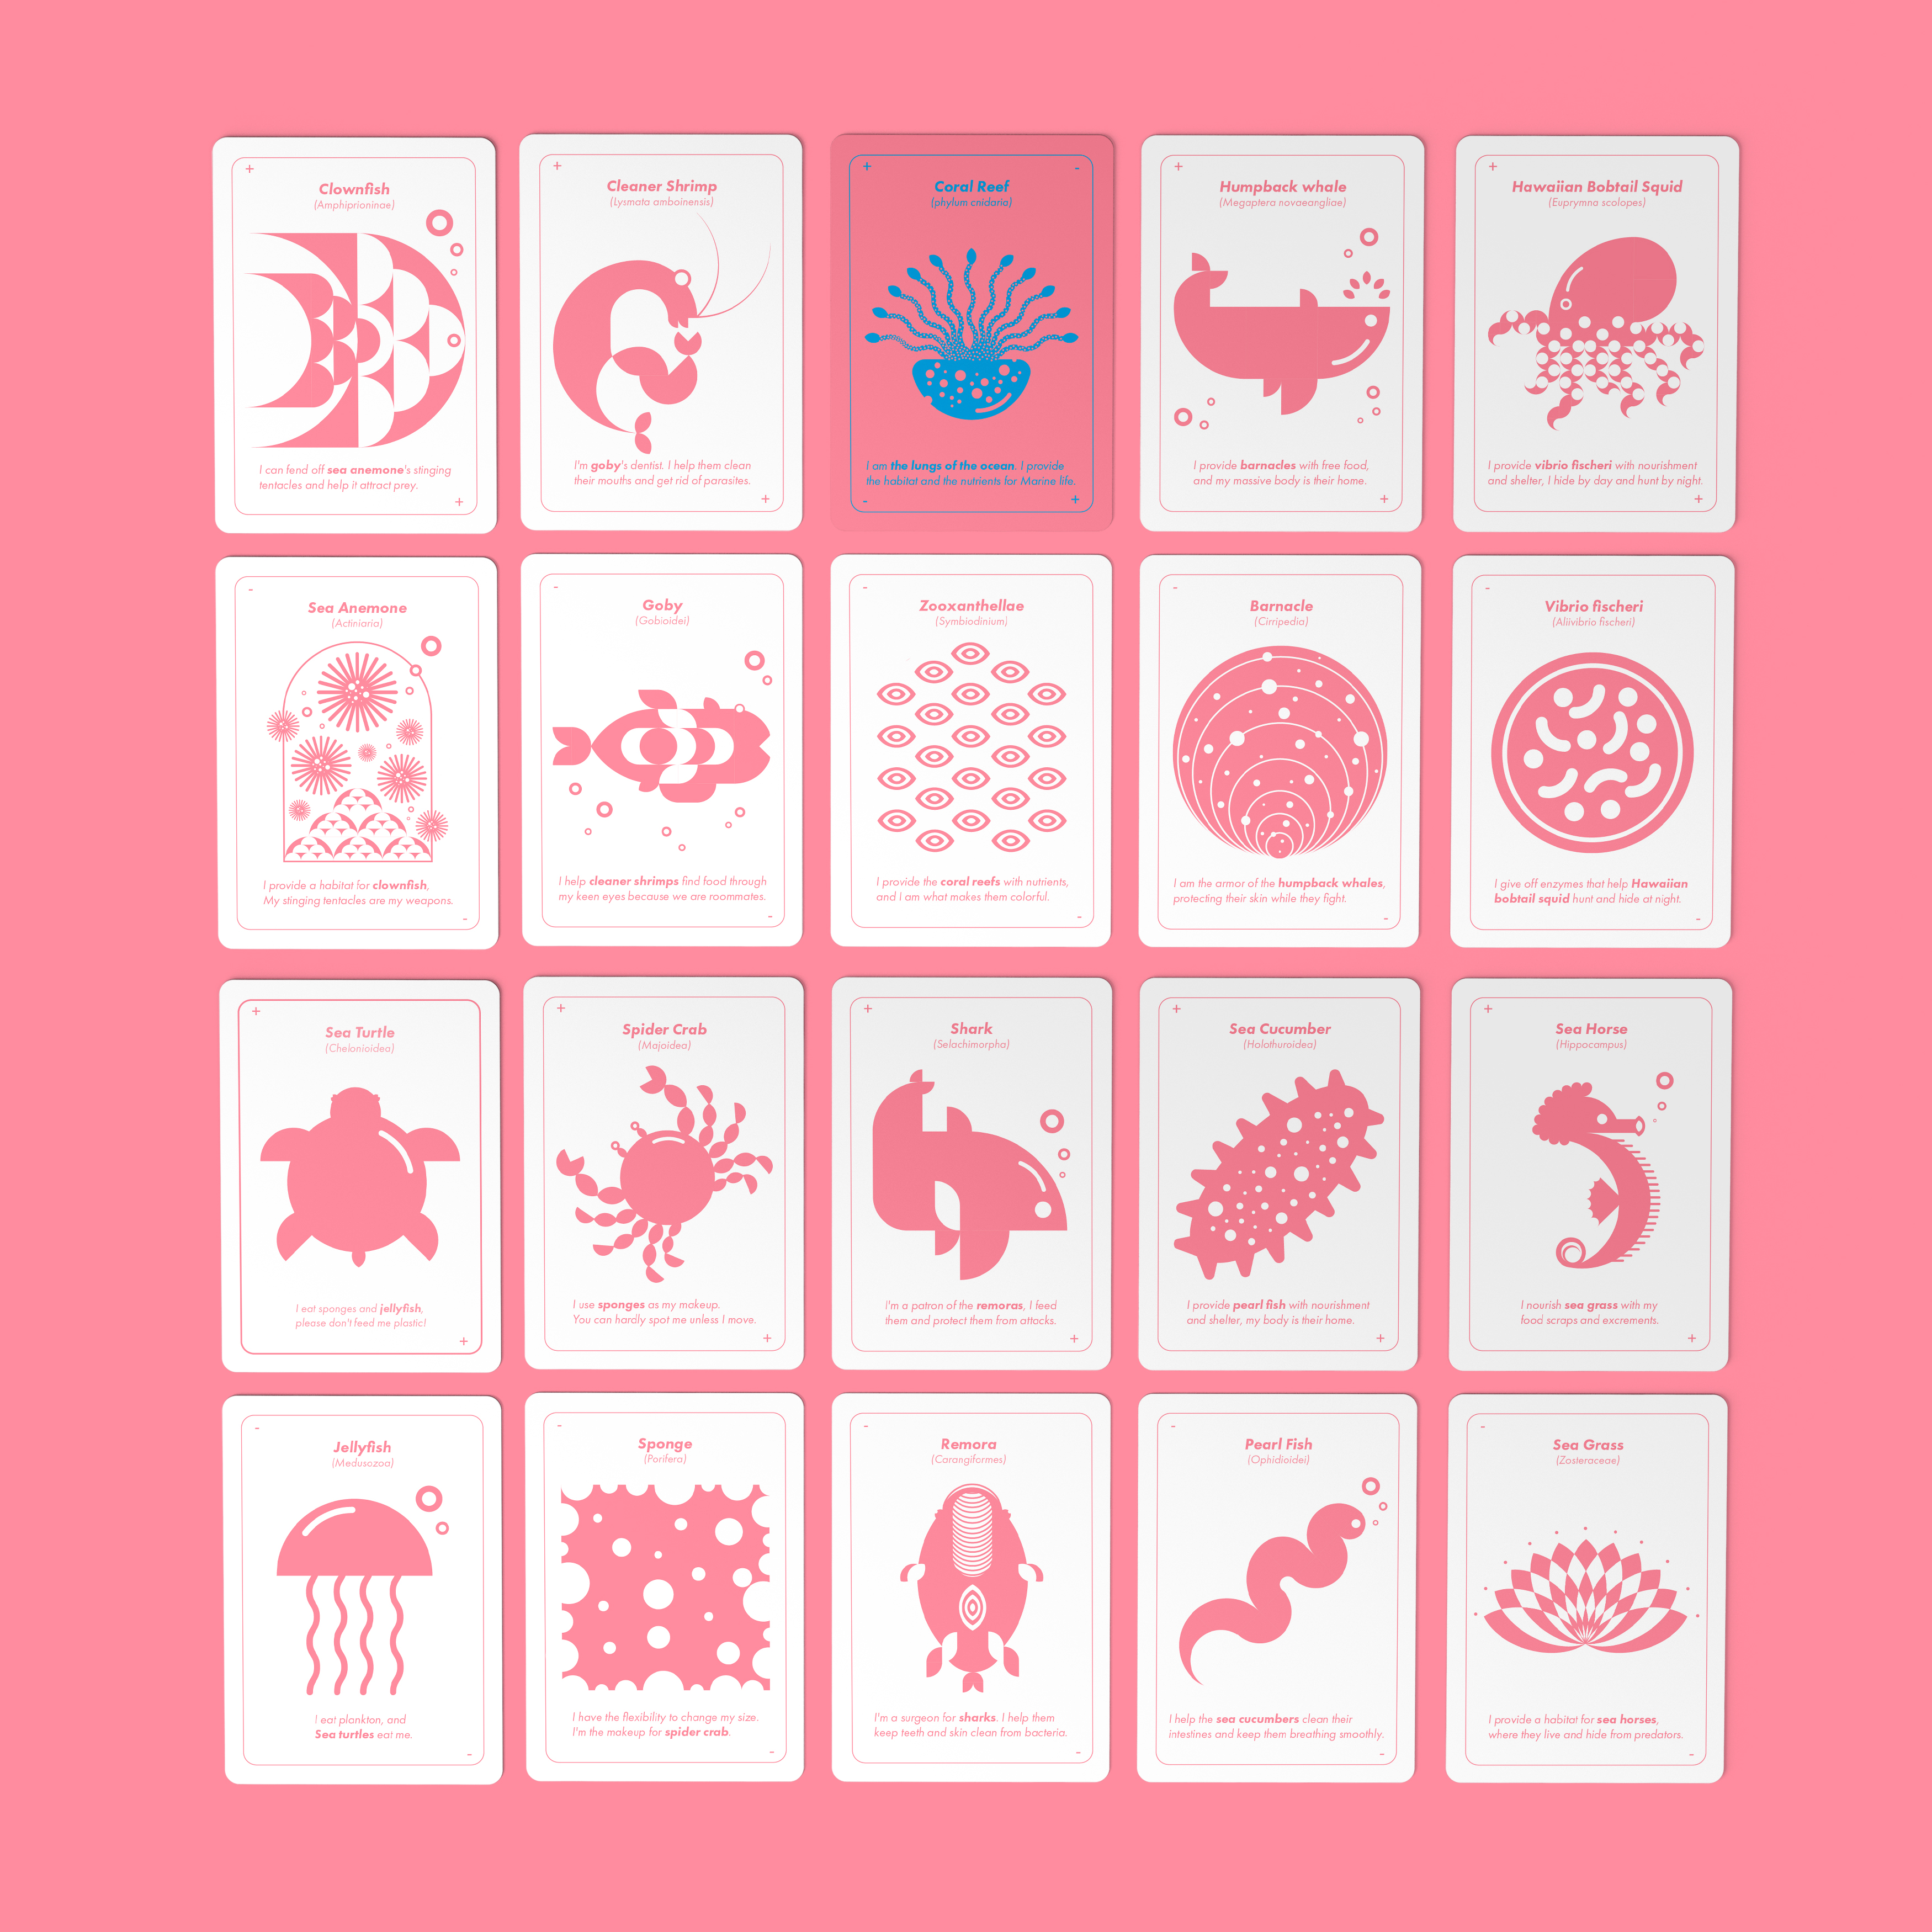 featured image two:The Spirit of Ocean Mutualism in Hawaii—Memory Game Card Design